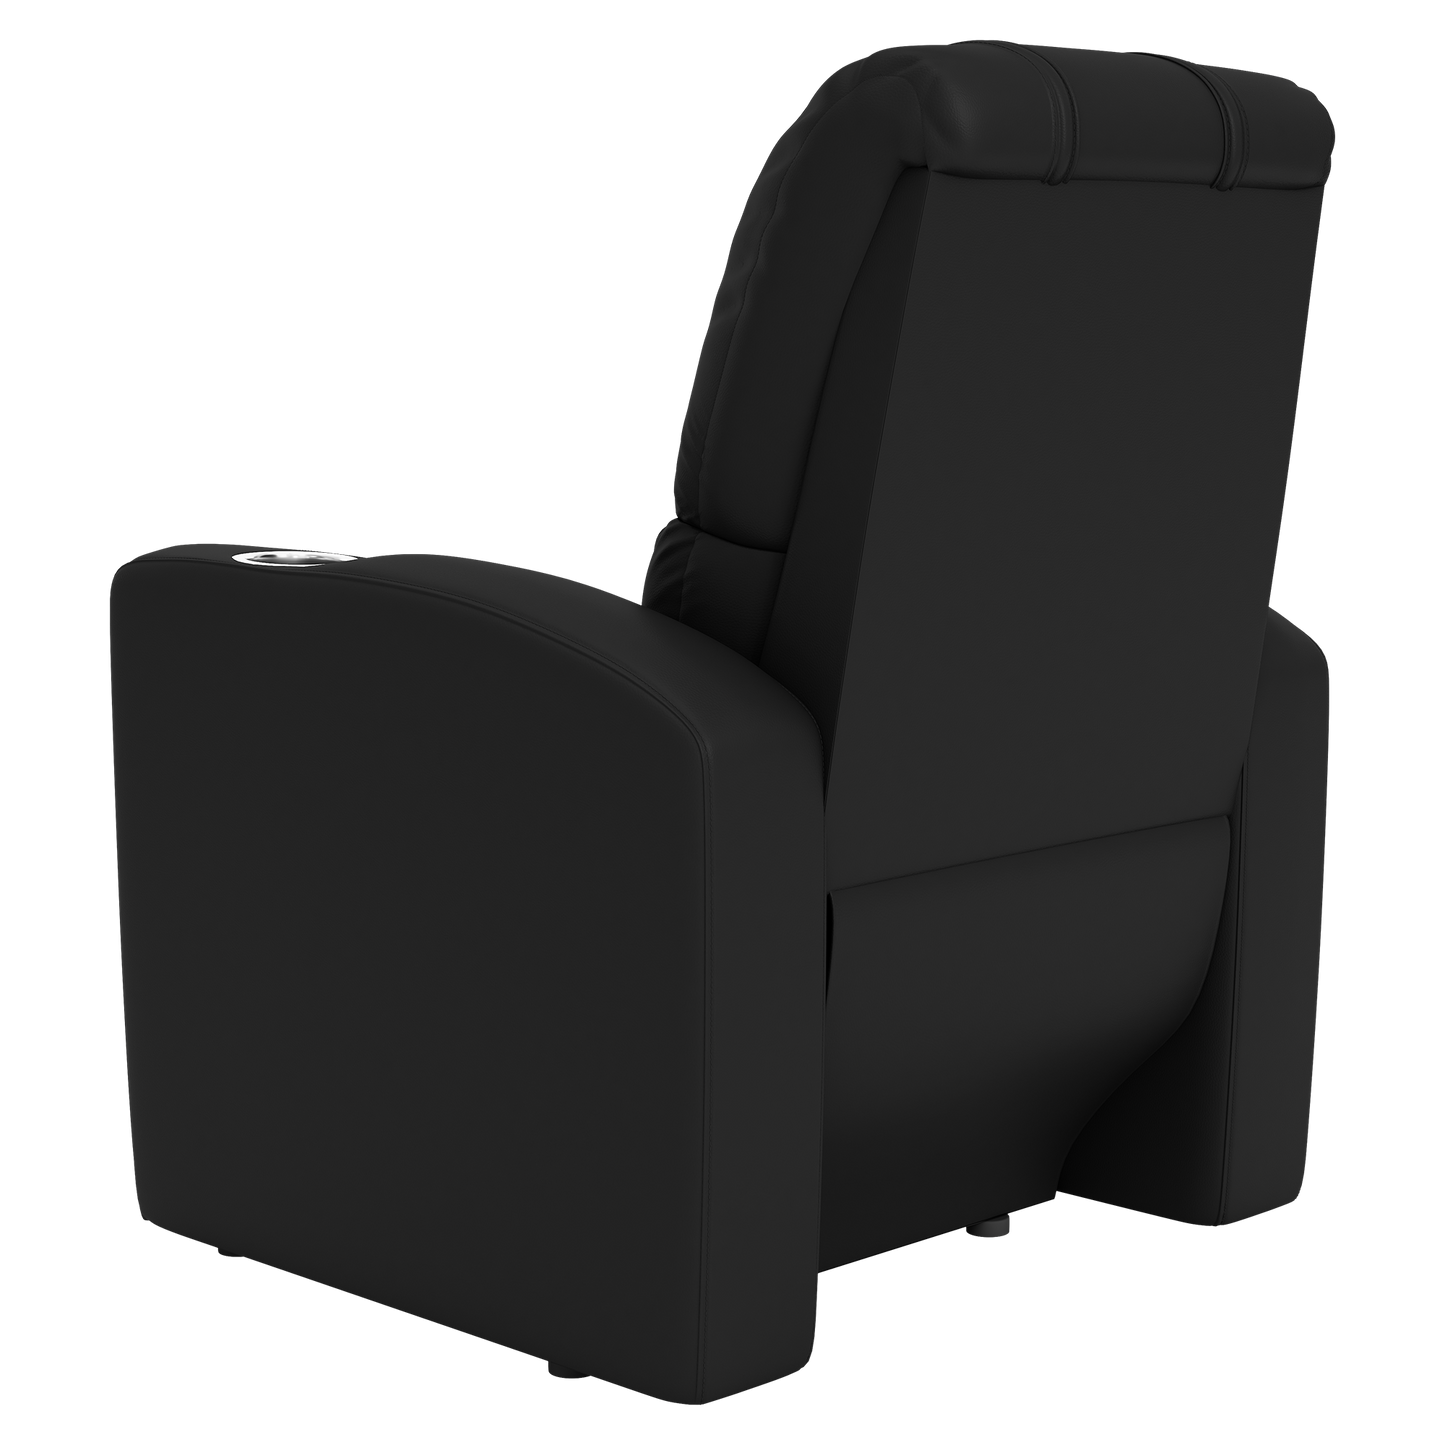 Stealth Recliner with Glytch Primary Logo